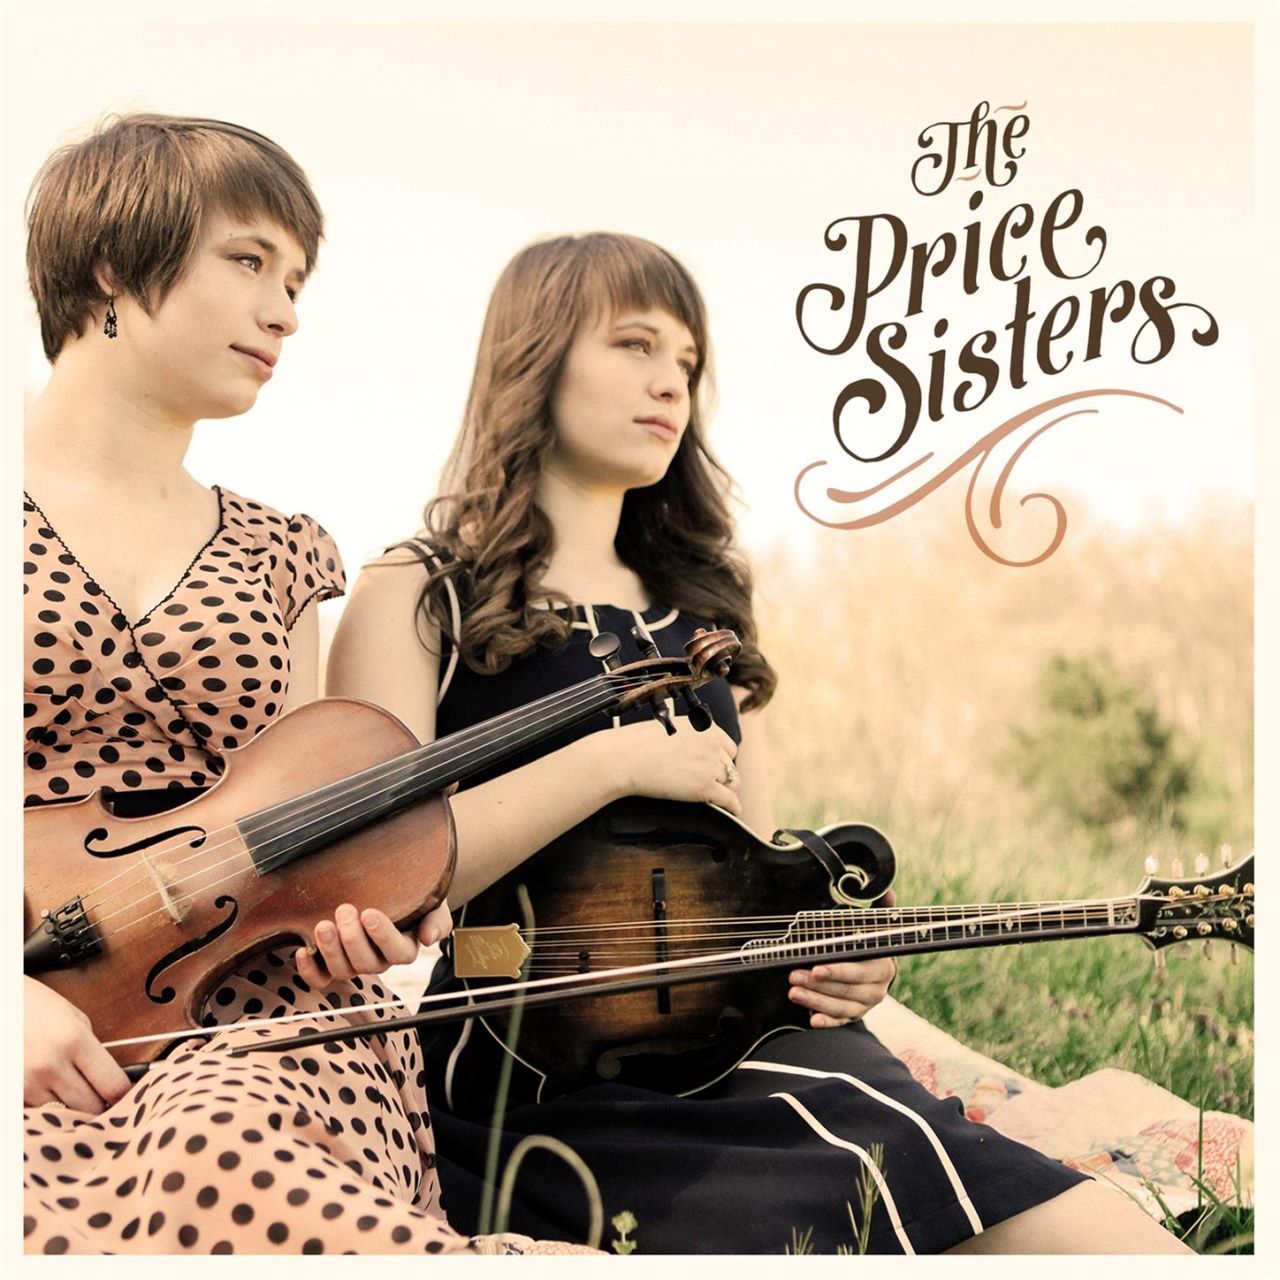 Price Sisters - The Price Sisters cover album